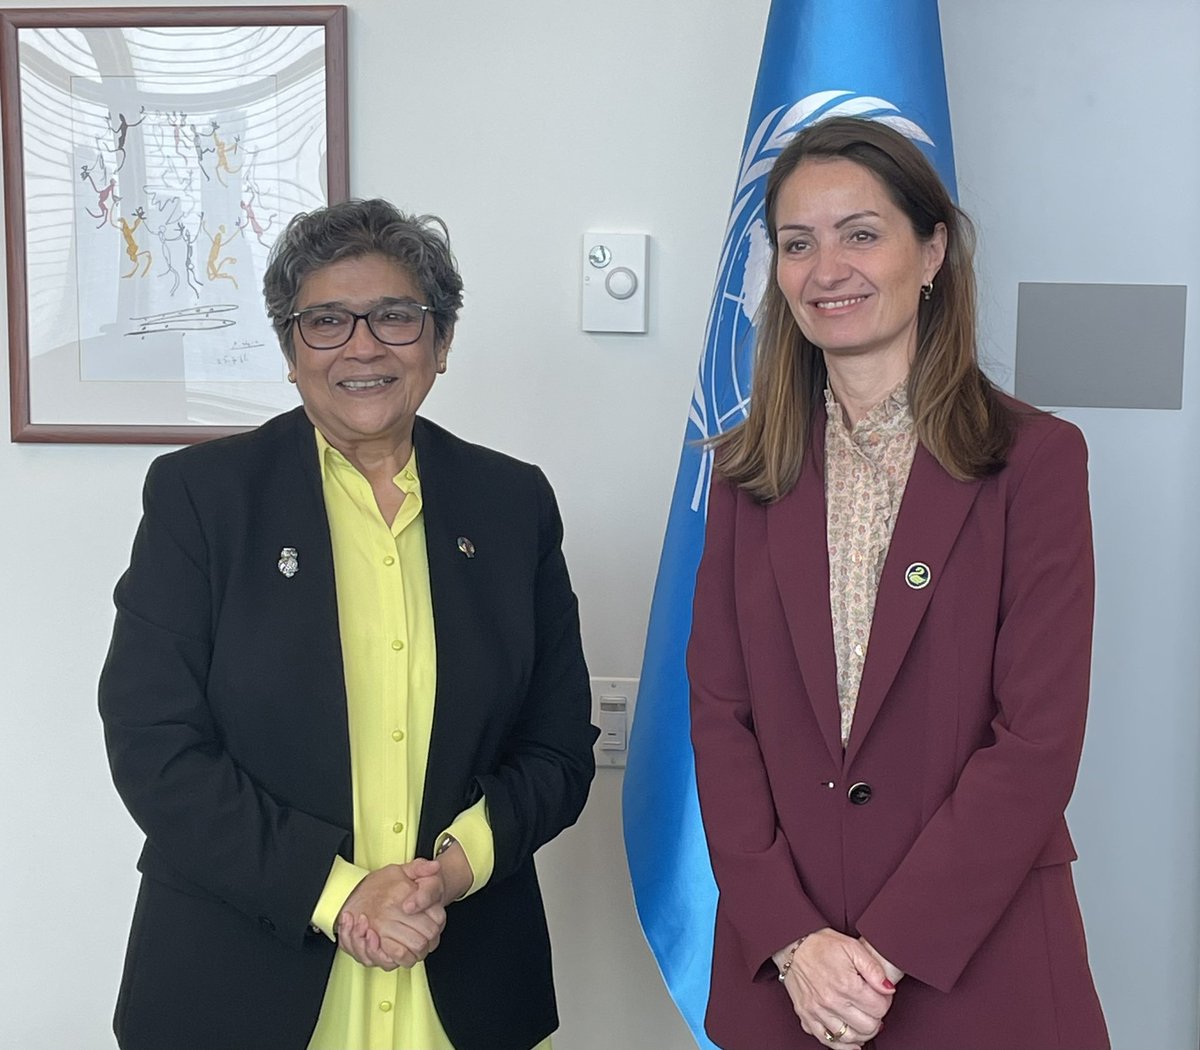 Thank you @USGRabab_UN for the important work in your capacity as @UNHighRep for LDCs, LLDCs & SIDS. 🇩🇰 strongly supports the adoption of the Antigua & Barbuda Agenda for SIDS at #SIDS4 and ways to bring strong climate perspective to the implementation. @UNOHRLLS